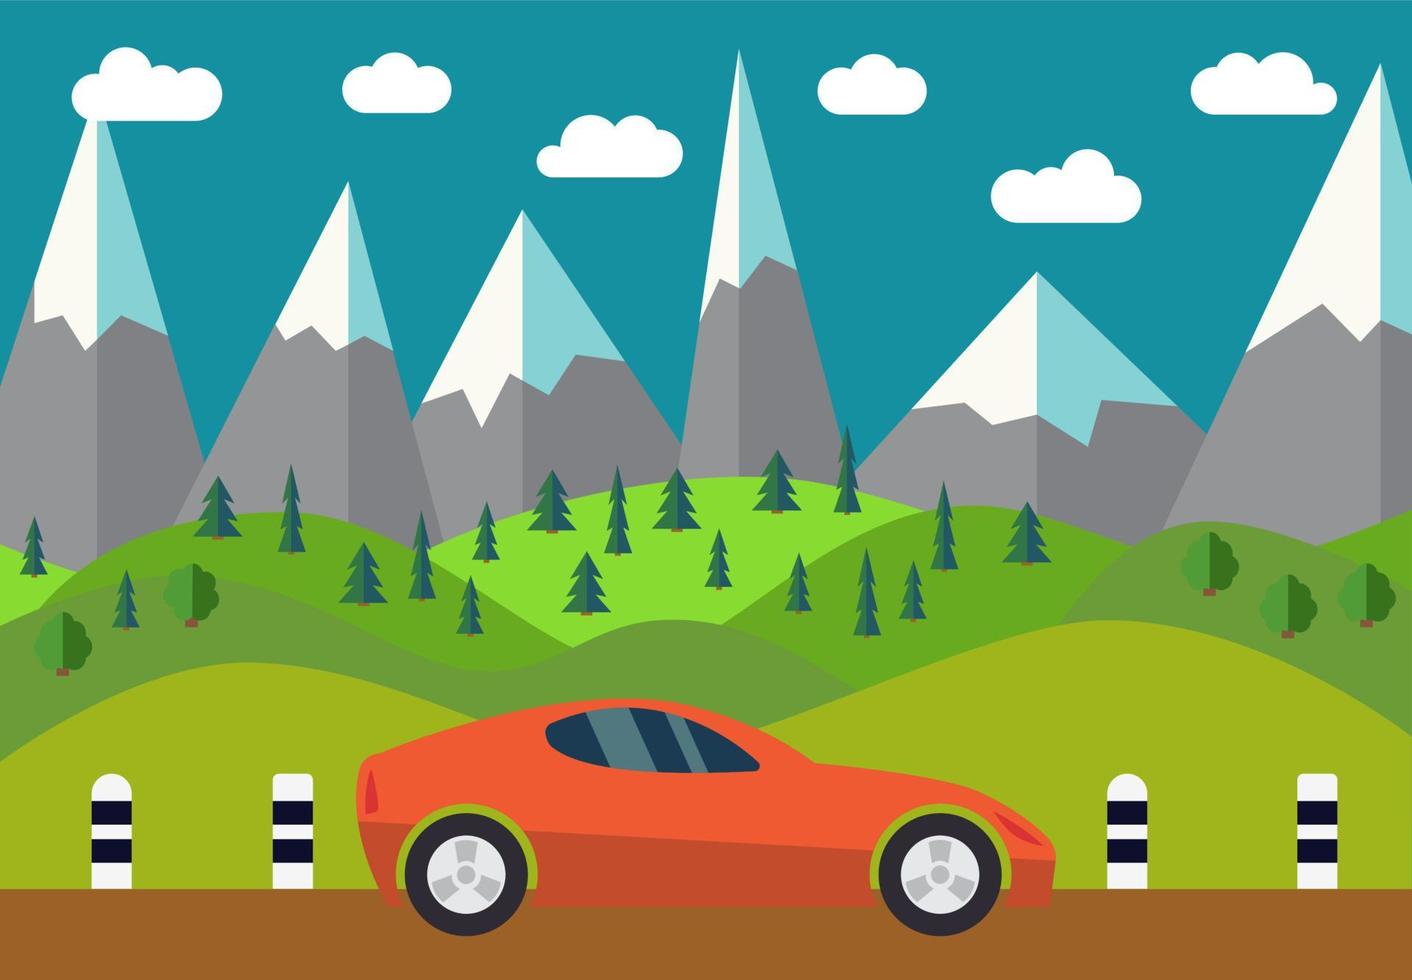 Red car on the road against the backdrop of the forest and mountains. Vector illustration.